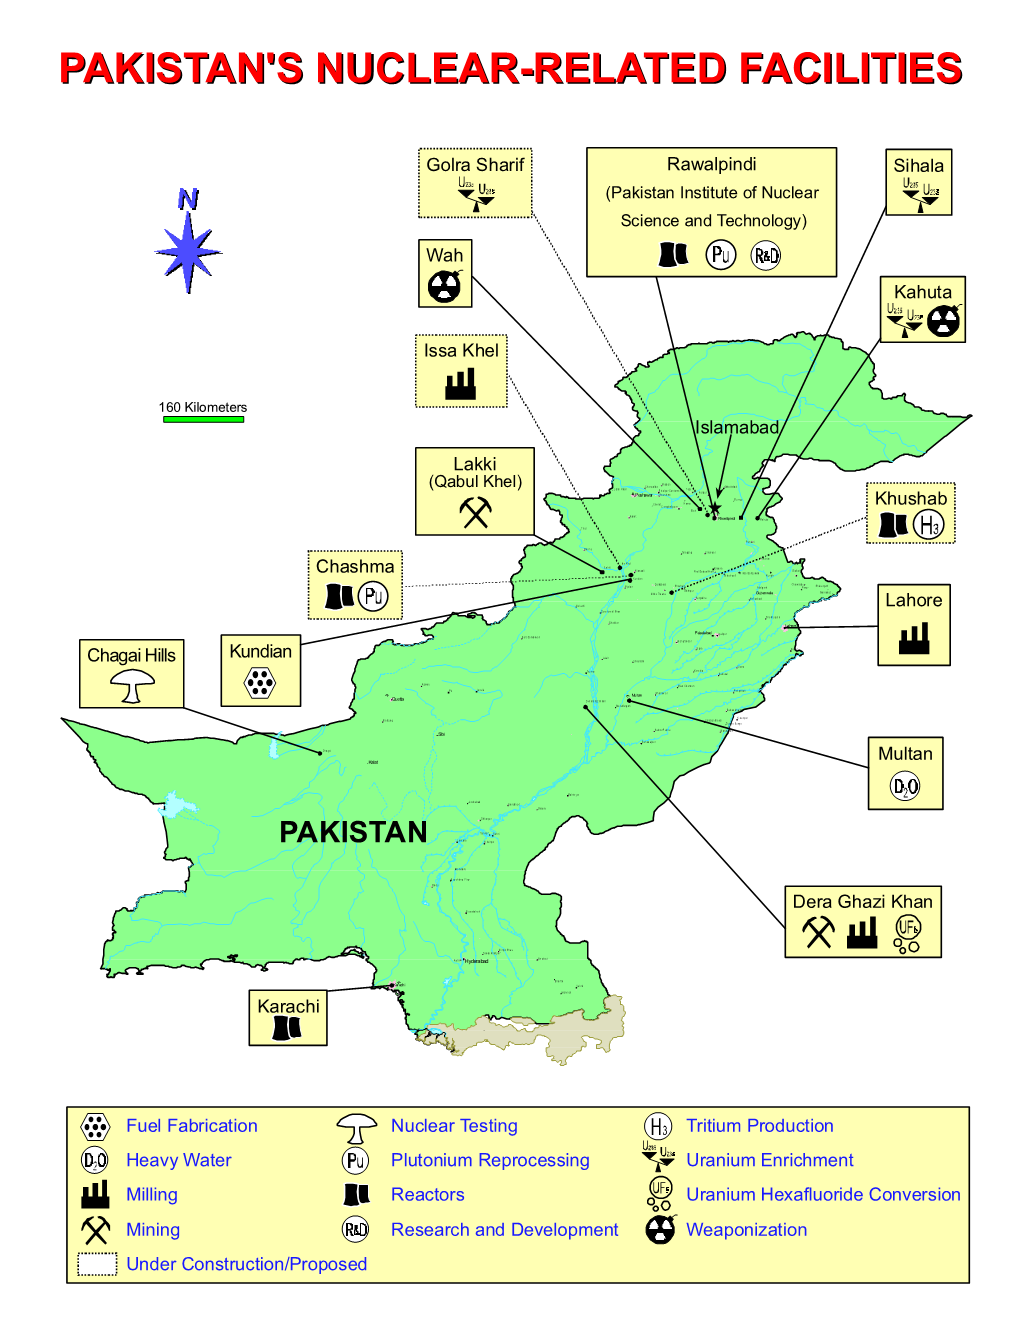 Pakistan's Nuclear Related Facilities